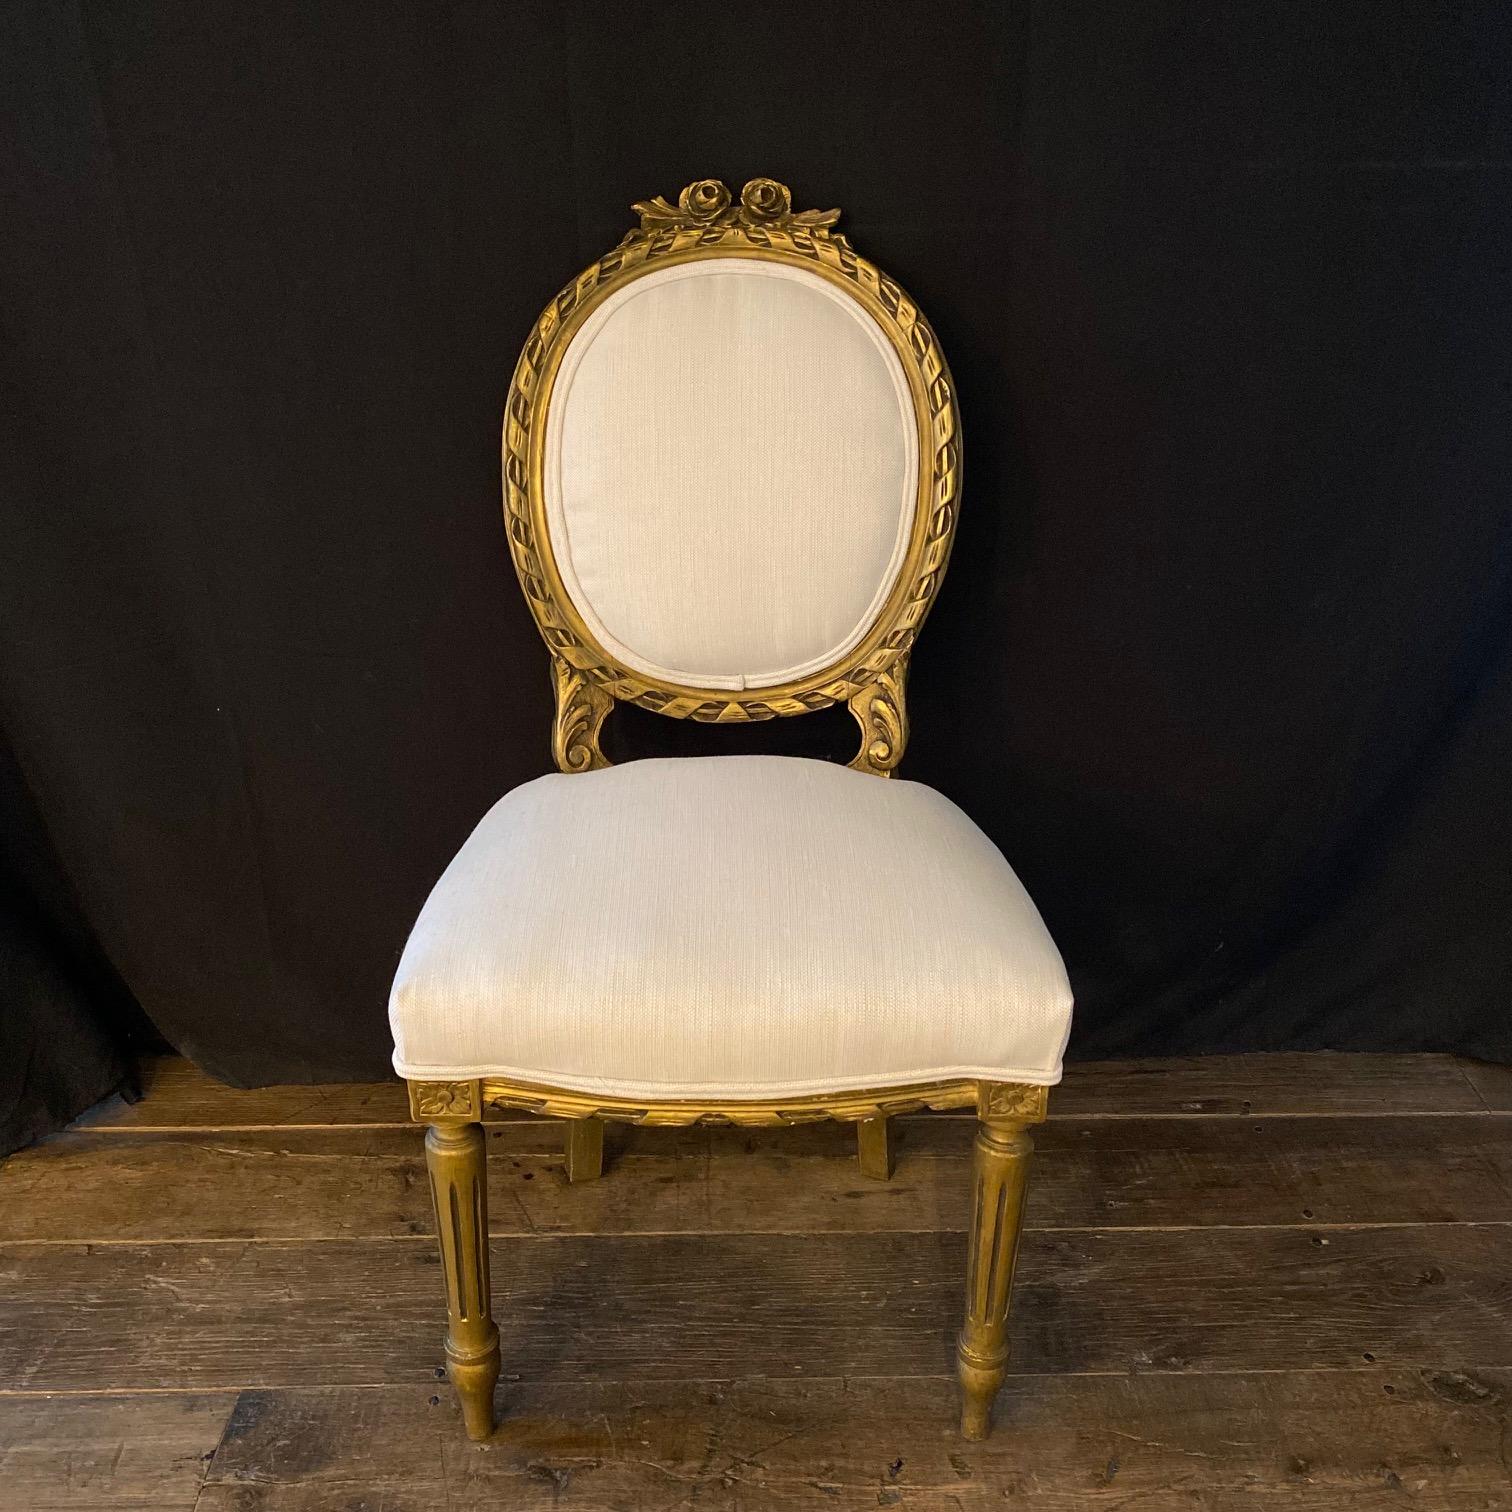 Moviestar glamorous pair of Louis XVI period carved giltwood side chairs. We love the restrained elegance of the Louis XVI style, and these chairs feature many of the details characteristic of the style--oval back, lovely carvings and tapered,